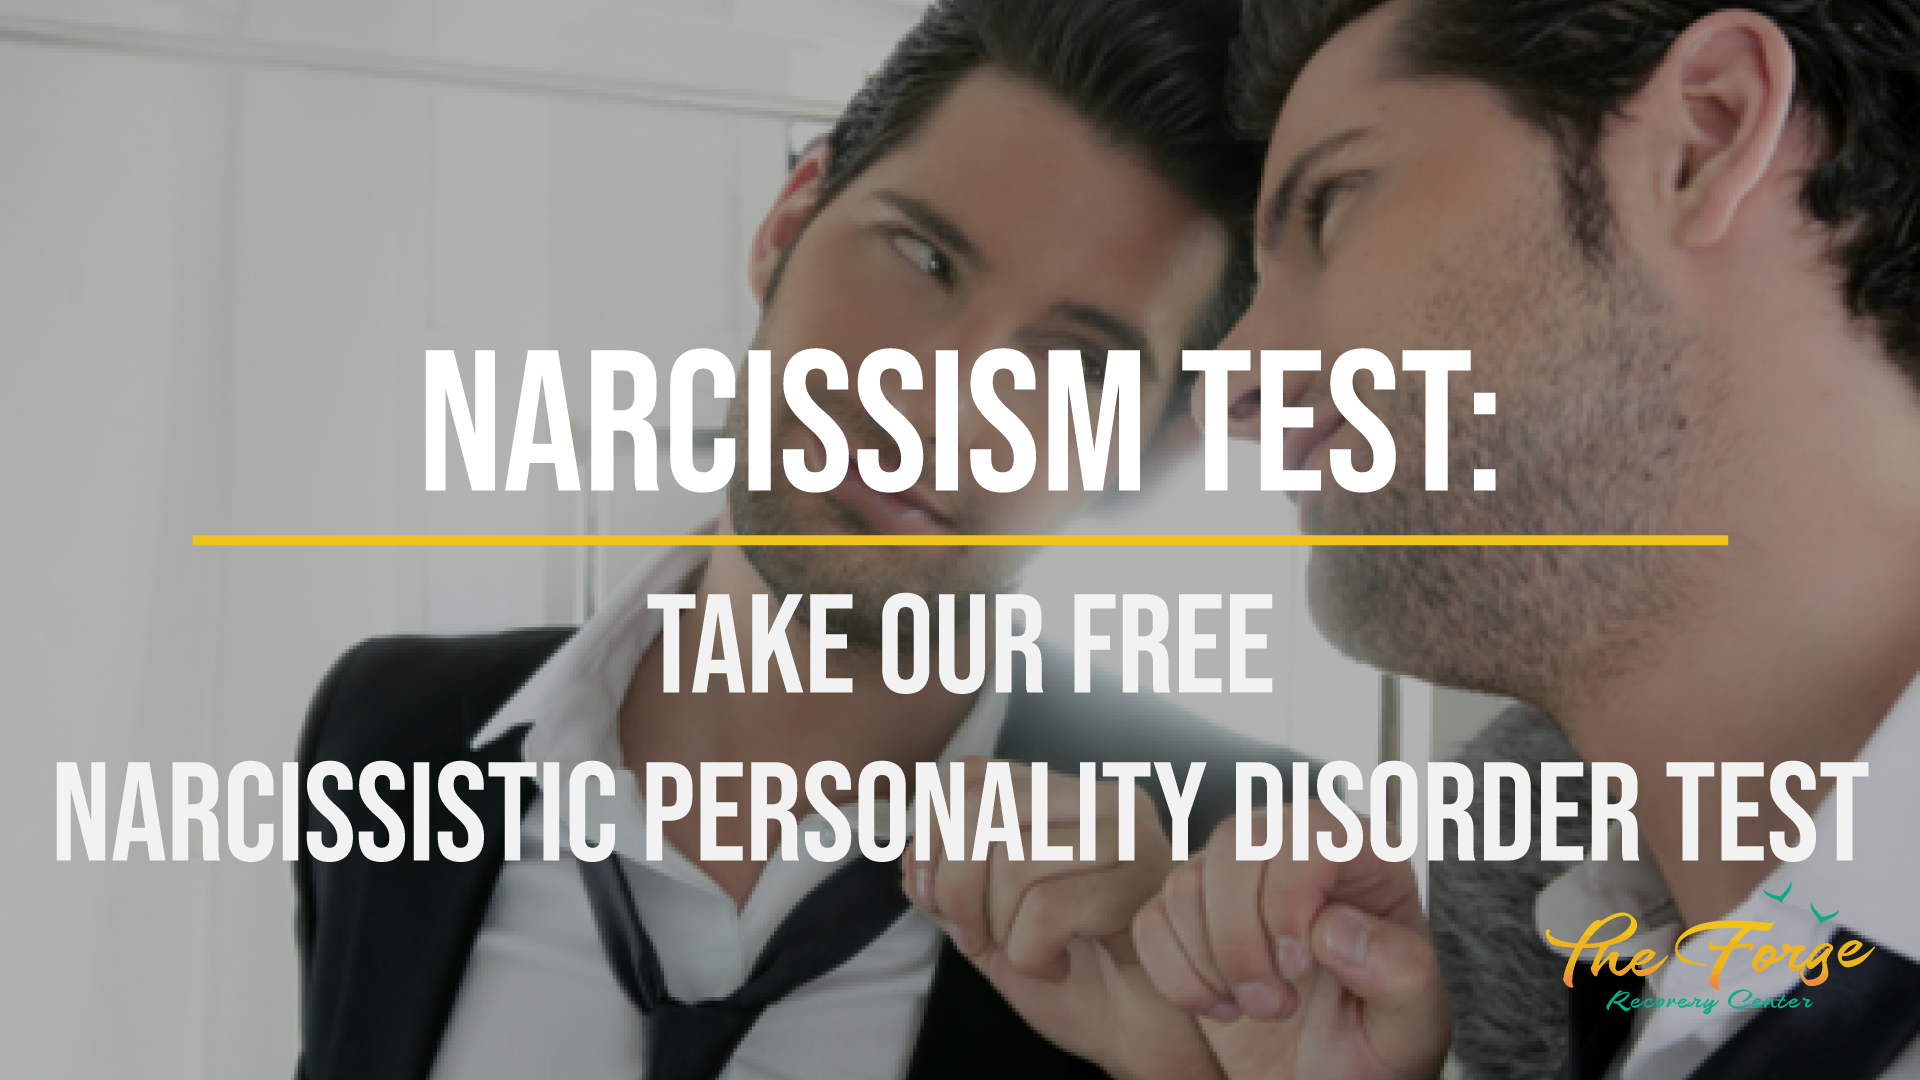 Think you have NPD? Take our FREE Narcissistic Personality Disorder Test!